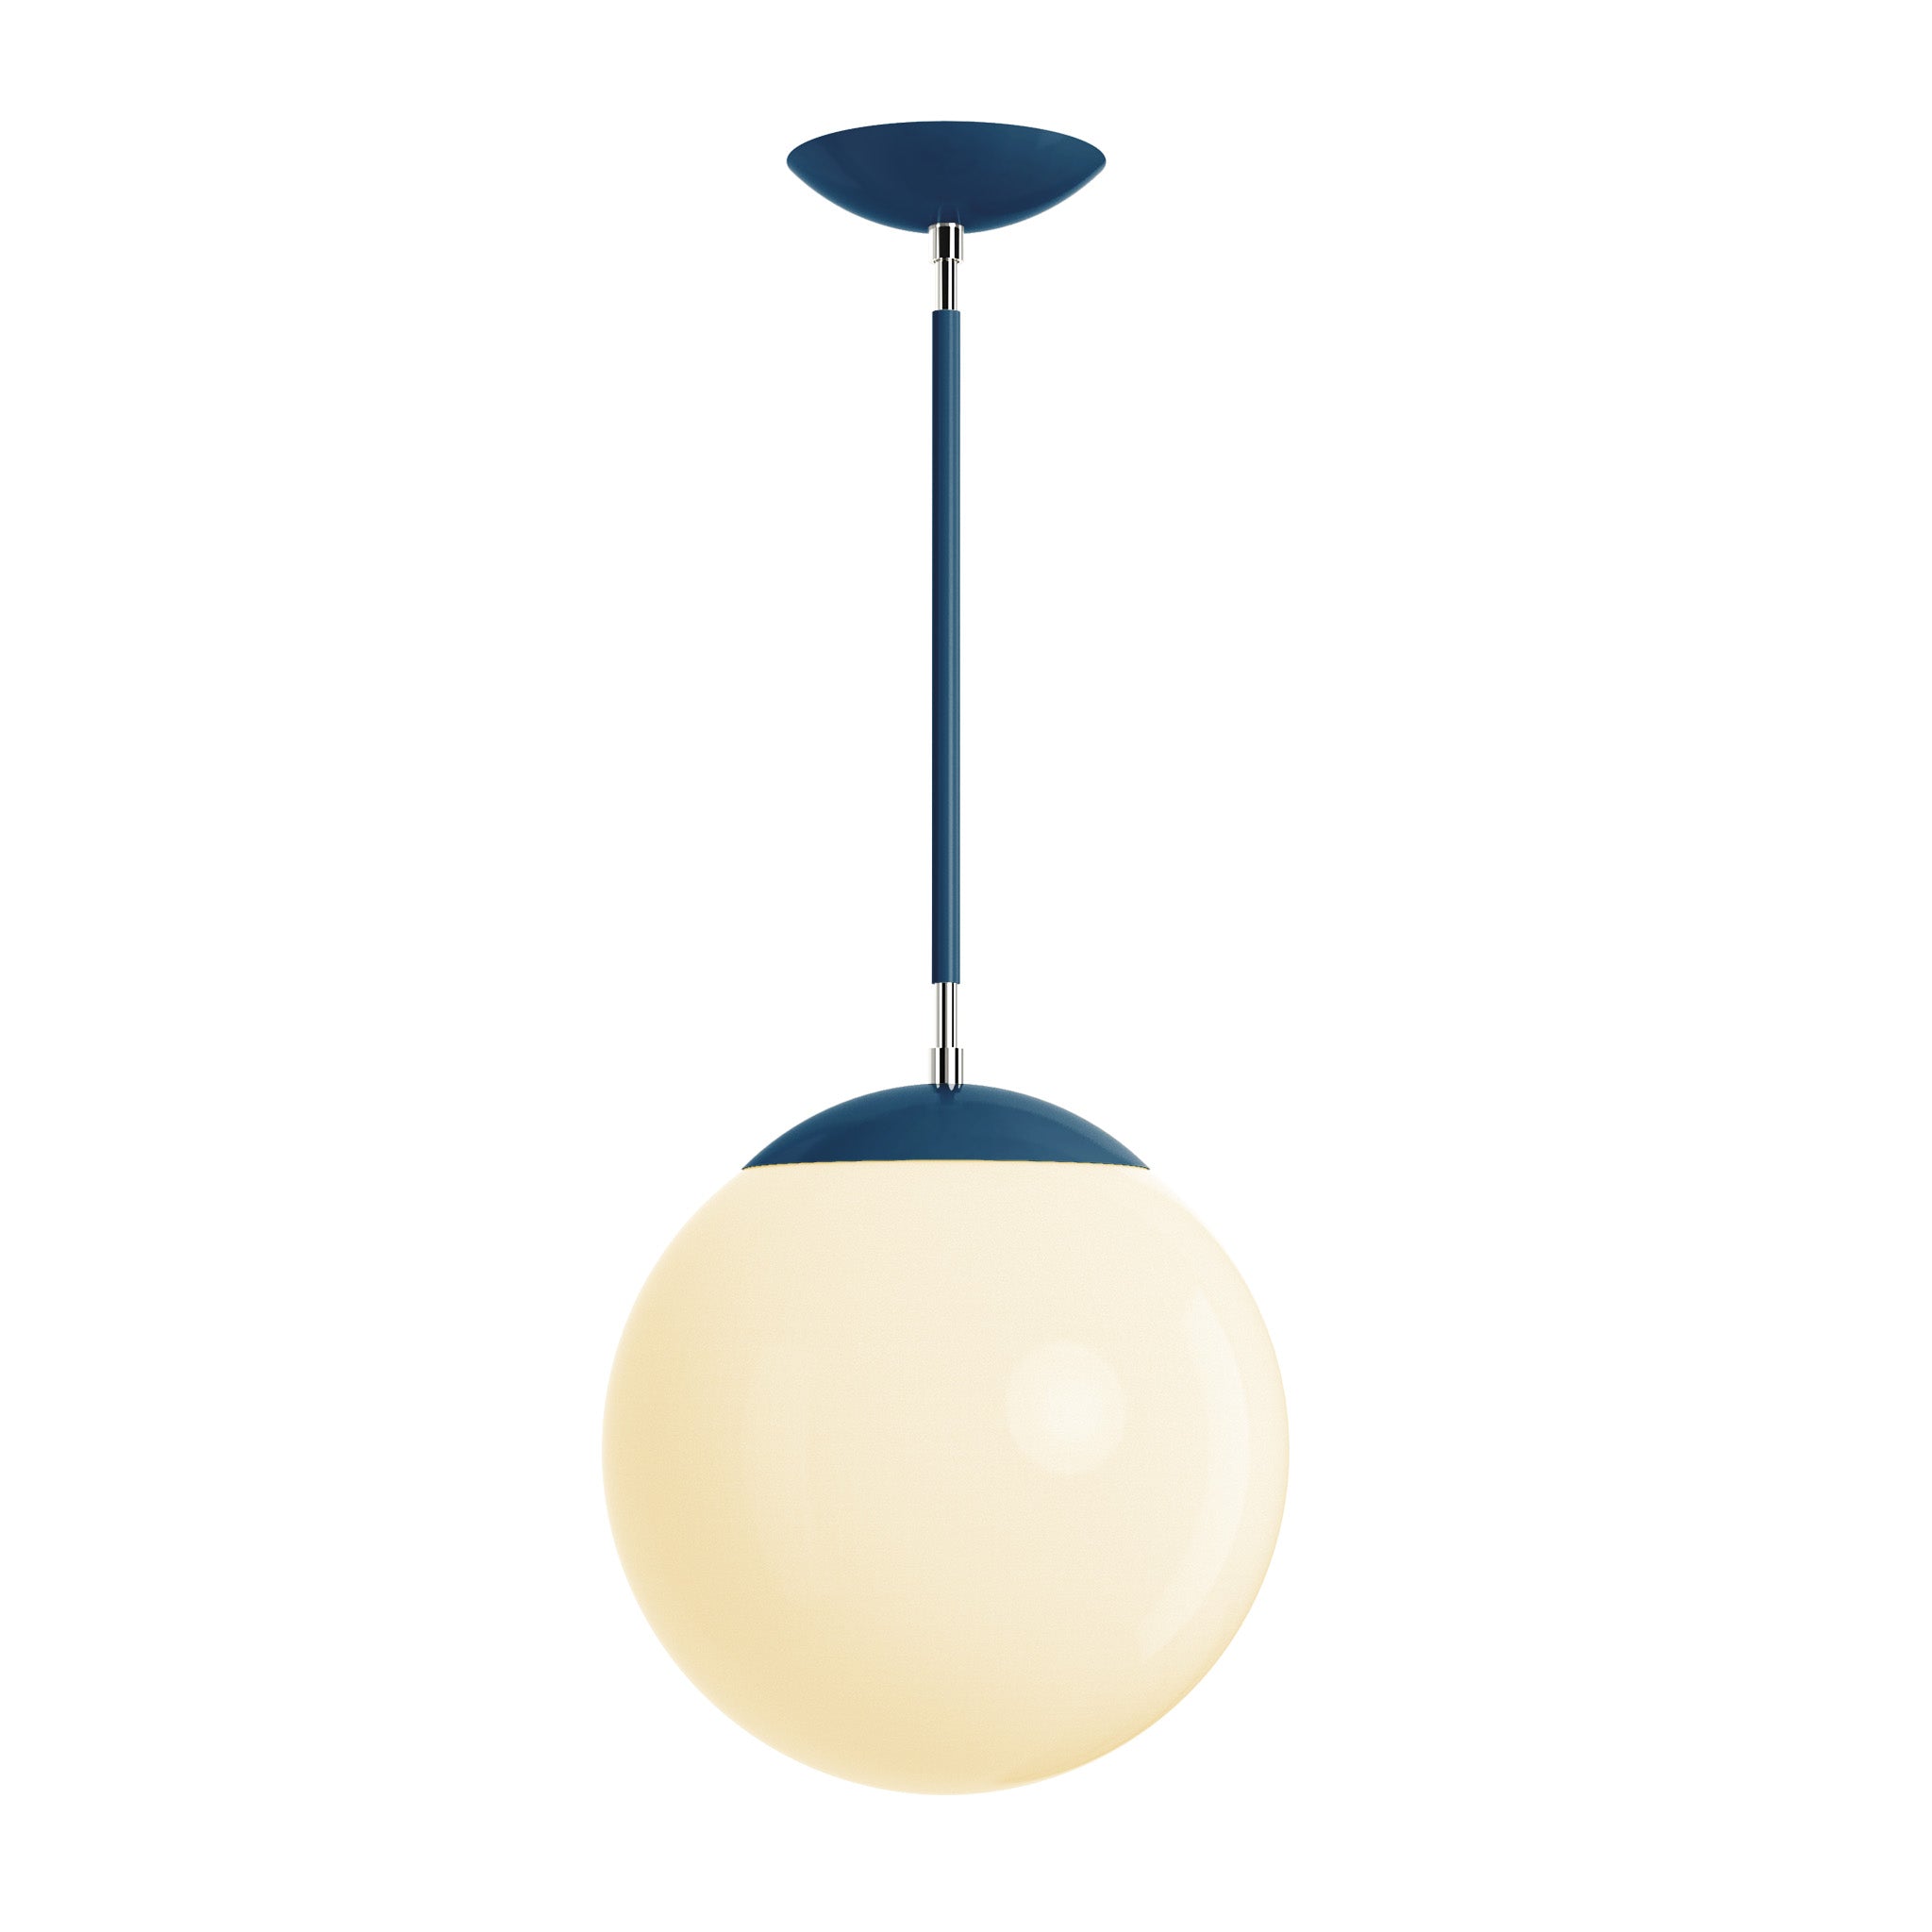 Polished nickel and slate blue cap globe pendant 12" dutton brown lighting